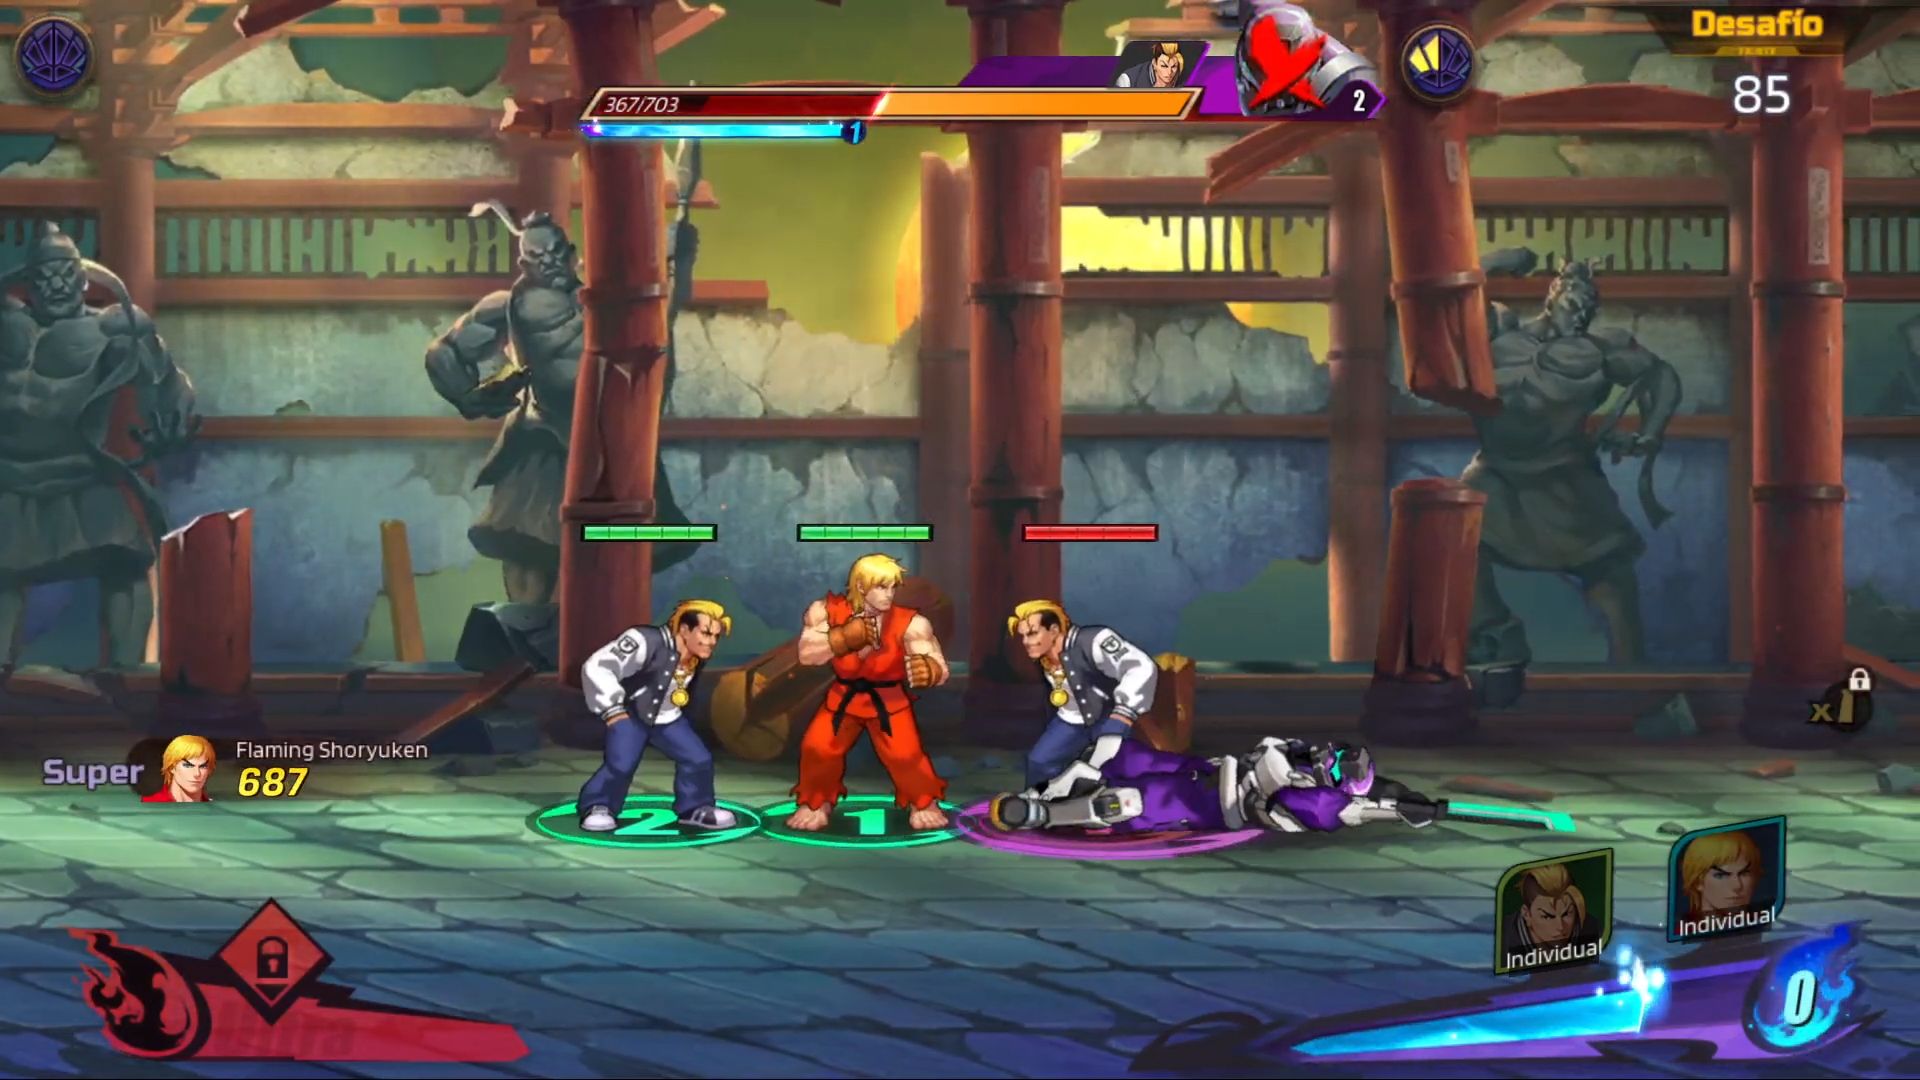 Gameplay of the Street Fighter: Duel for Android phone or tablet.